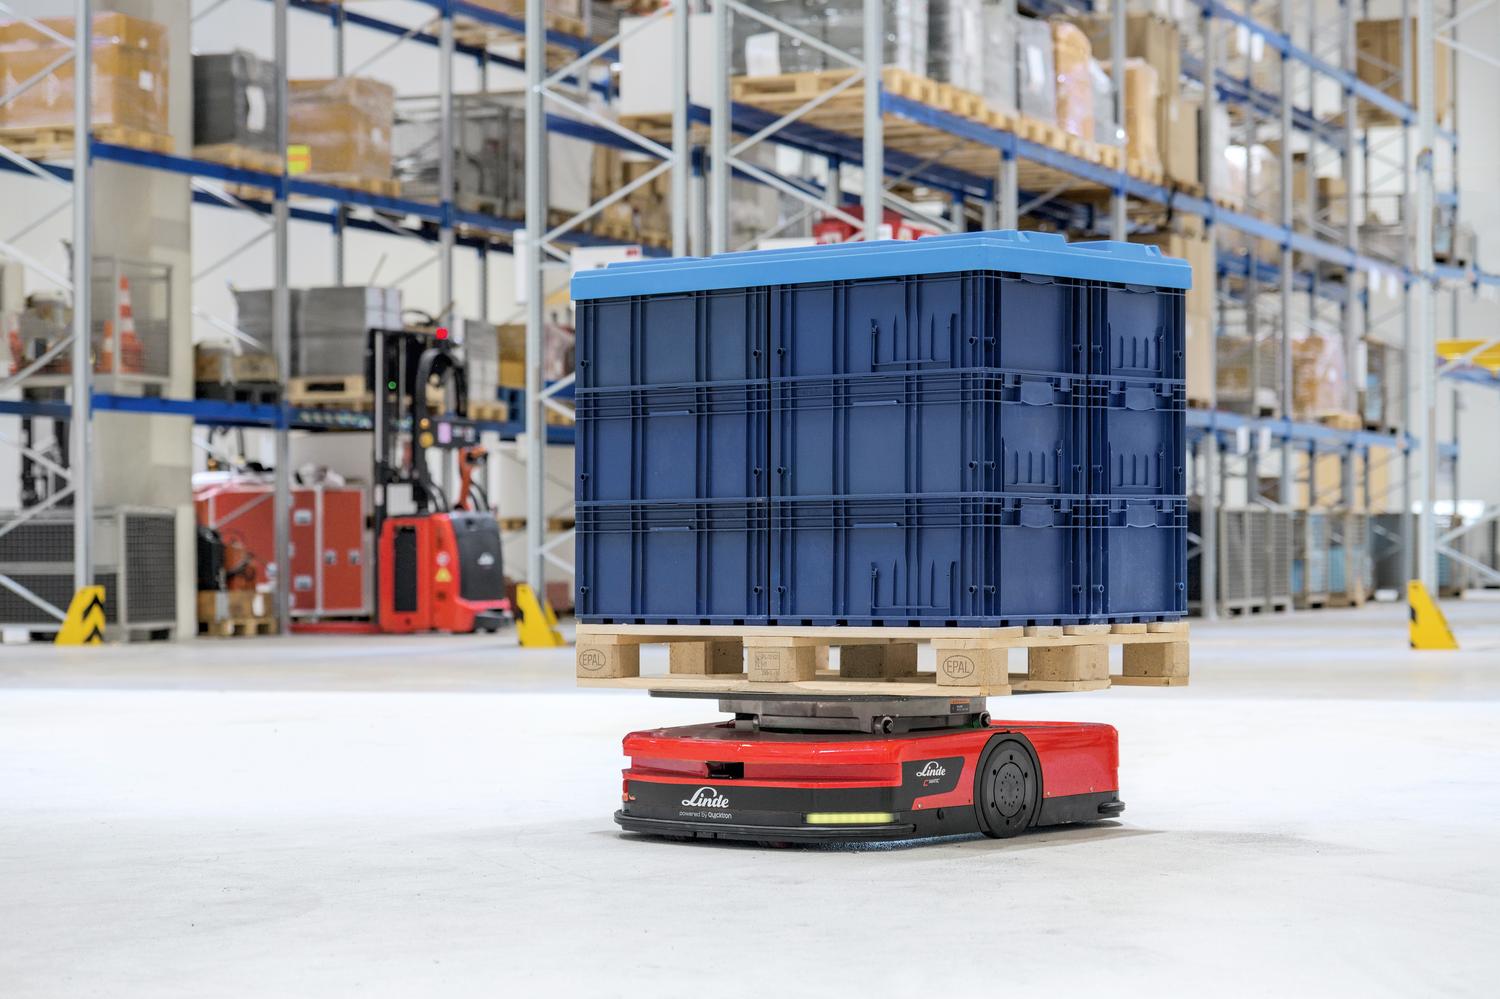 C-MATIC automated guided vehicle Linde 